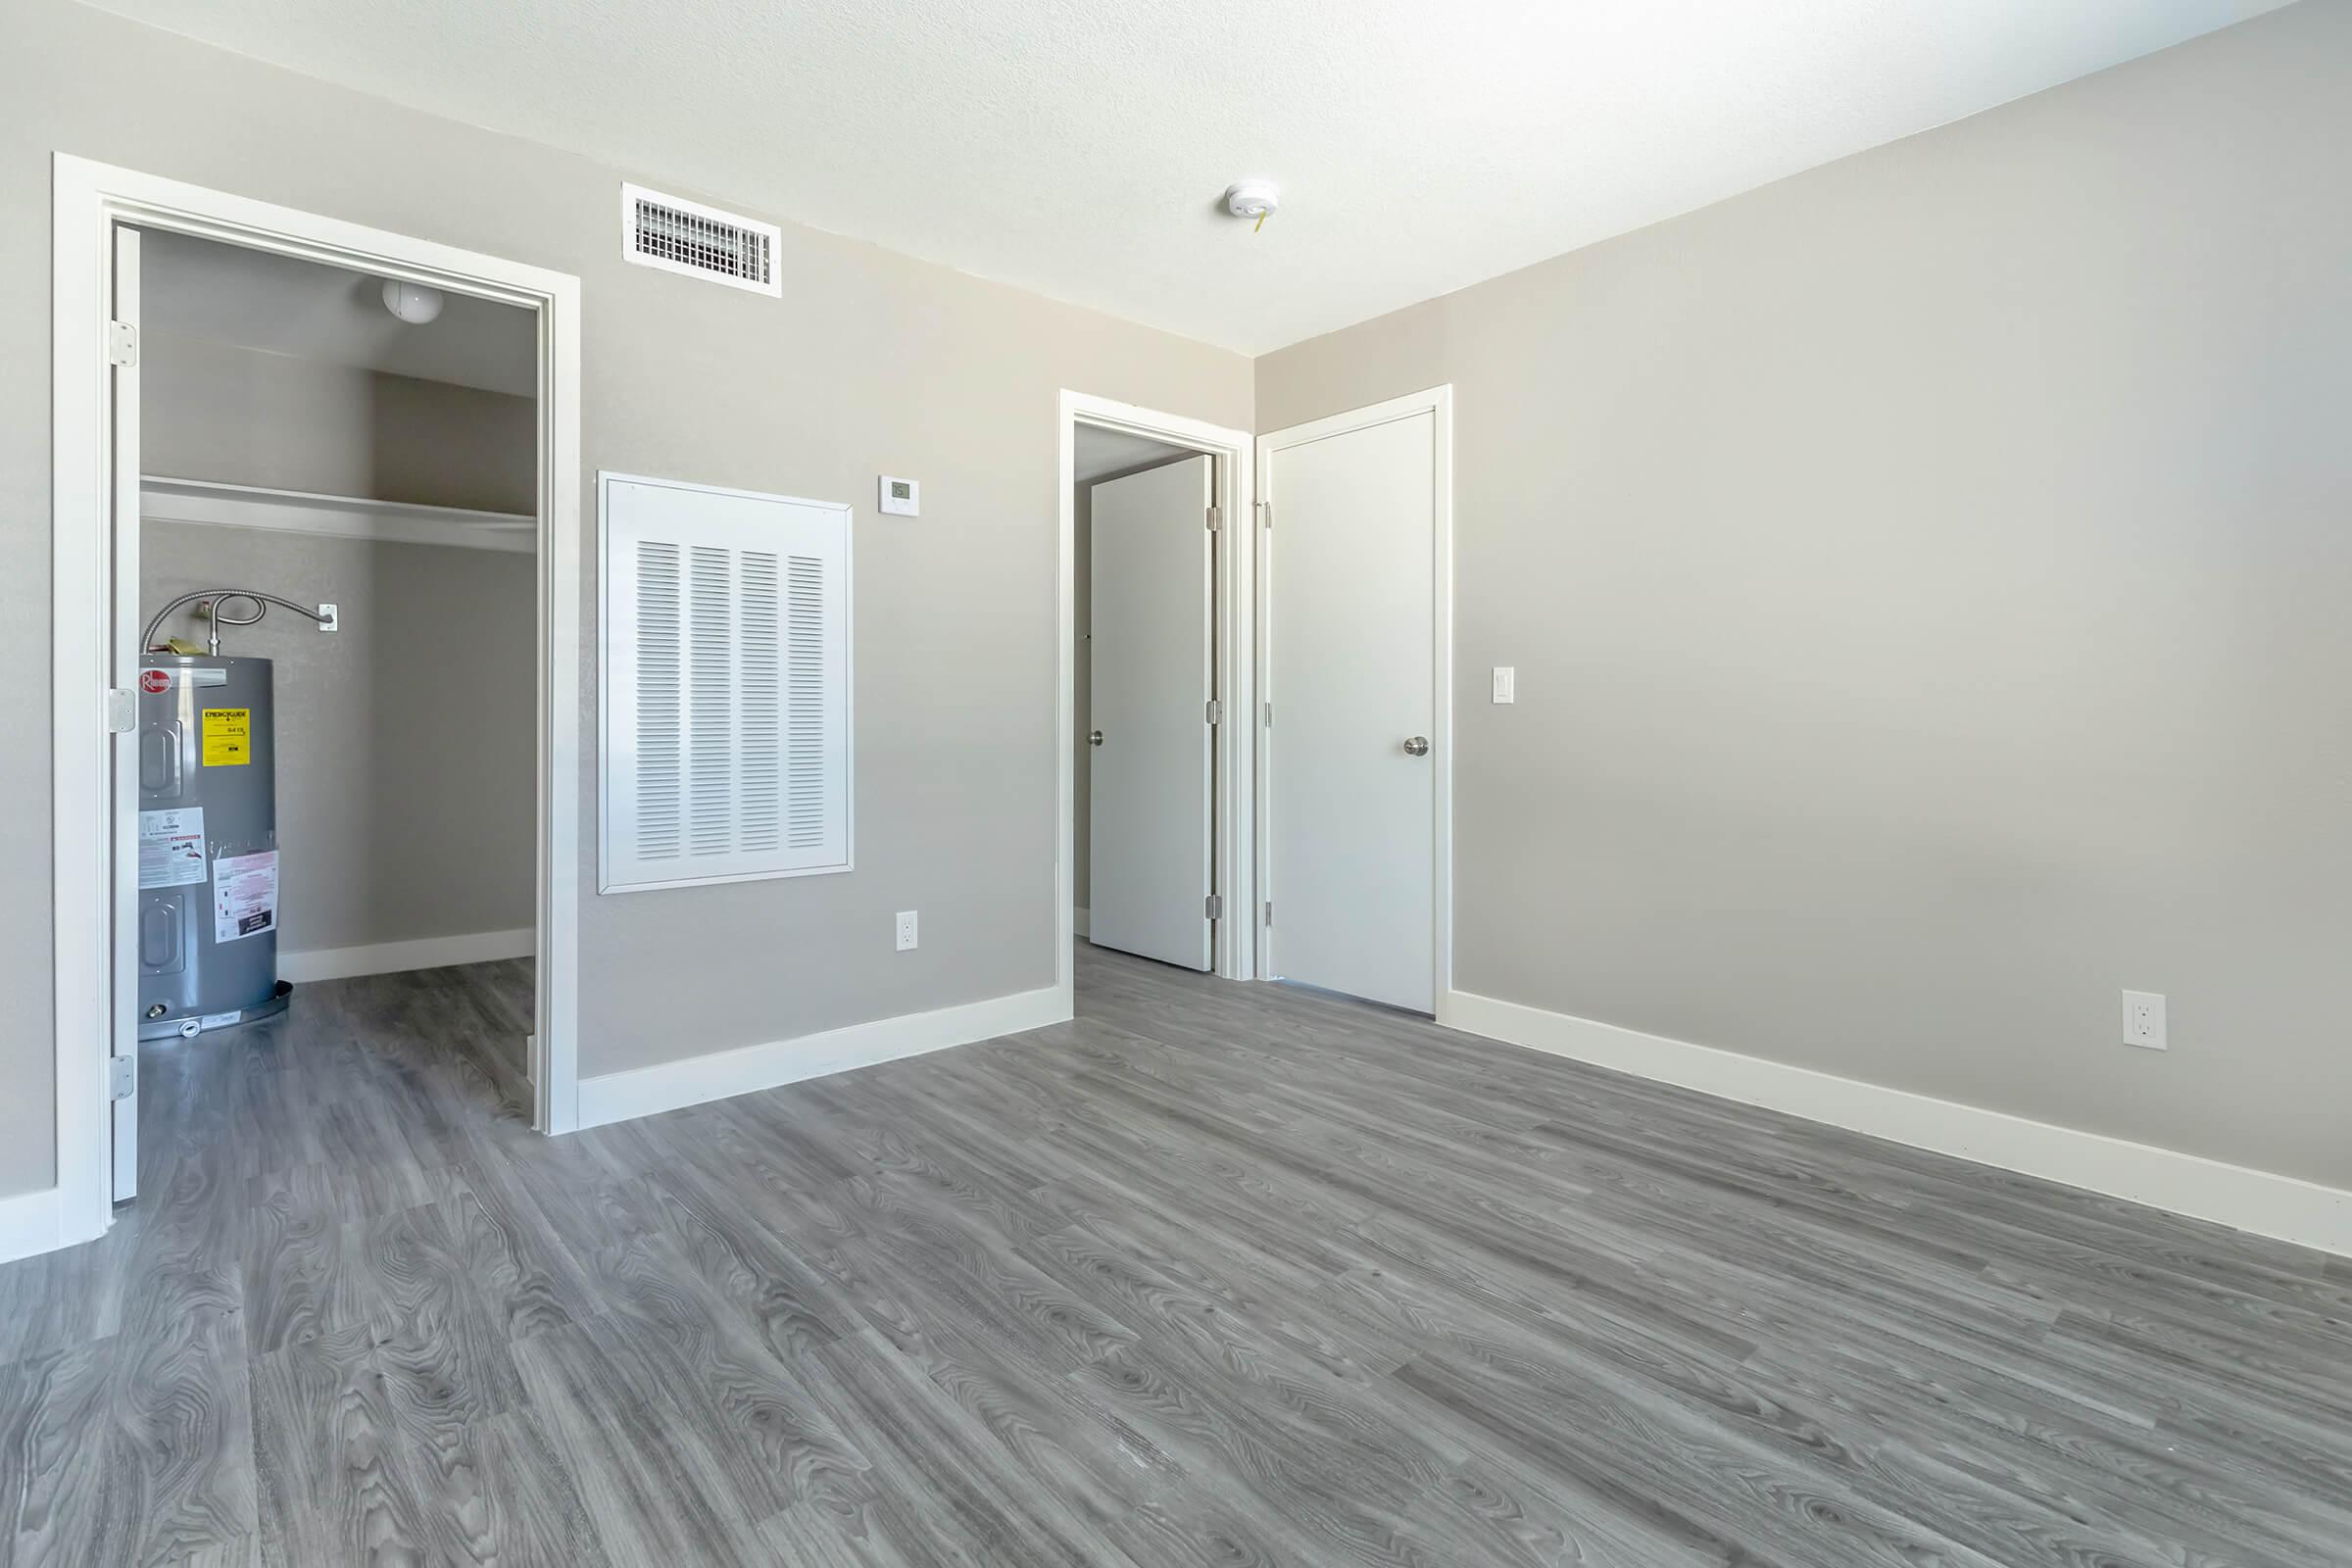 Clean spacious bedroom floor plan with attached bathroom and walk in closet